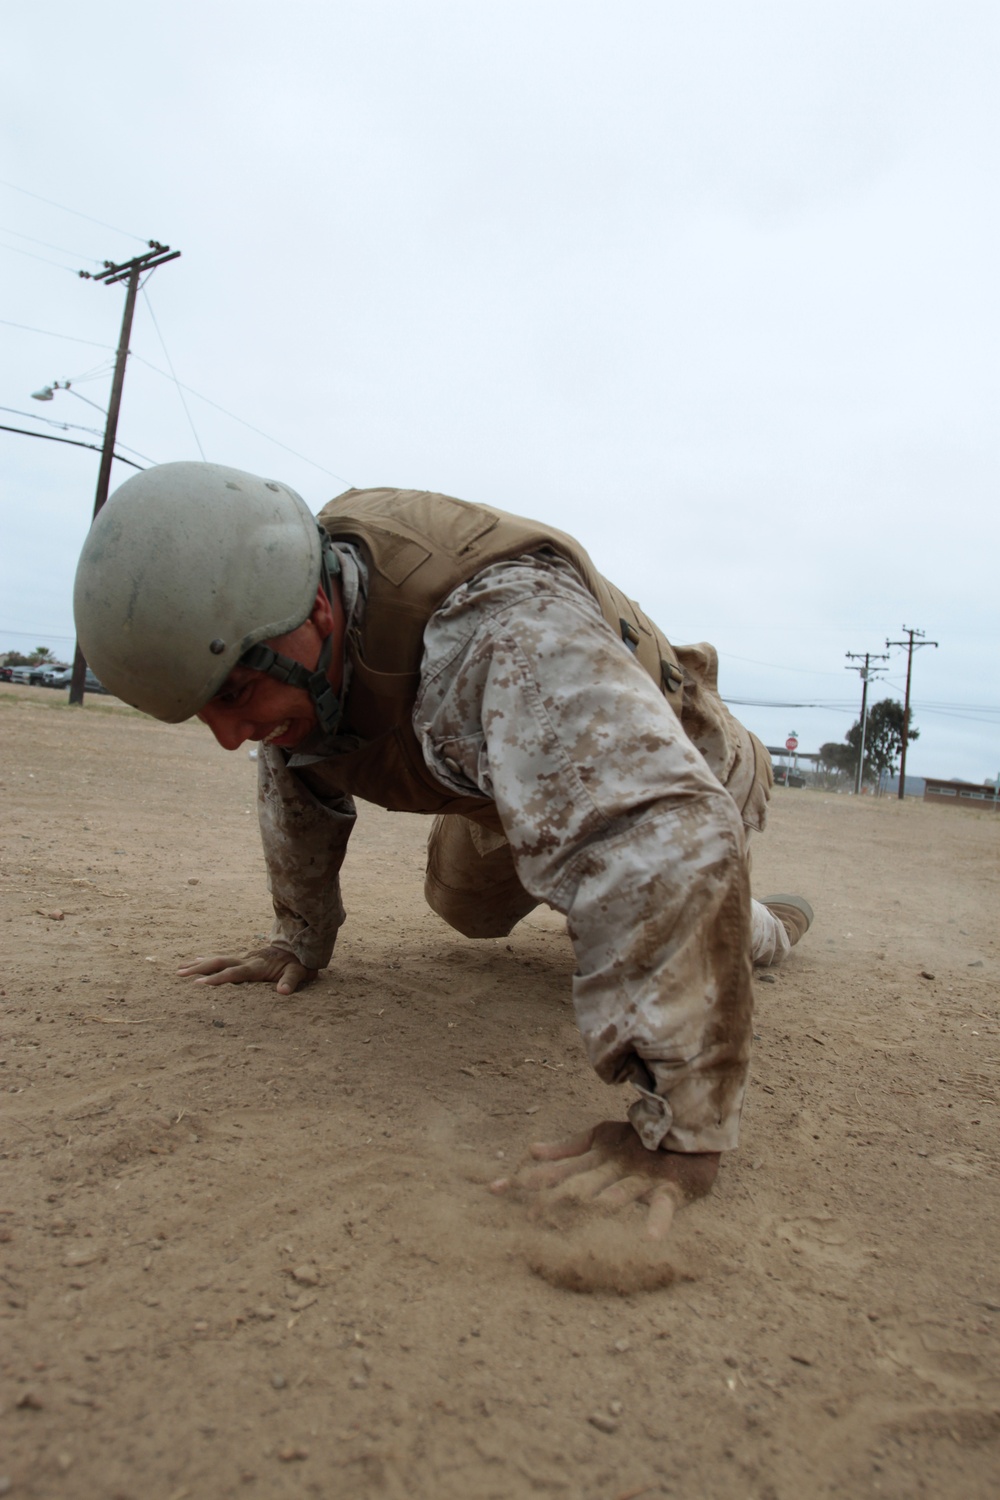 Martial Arts Instructor Course trains Marines to lead as ethical warriors